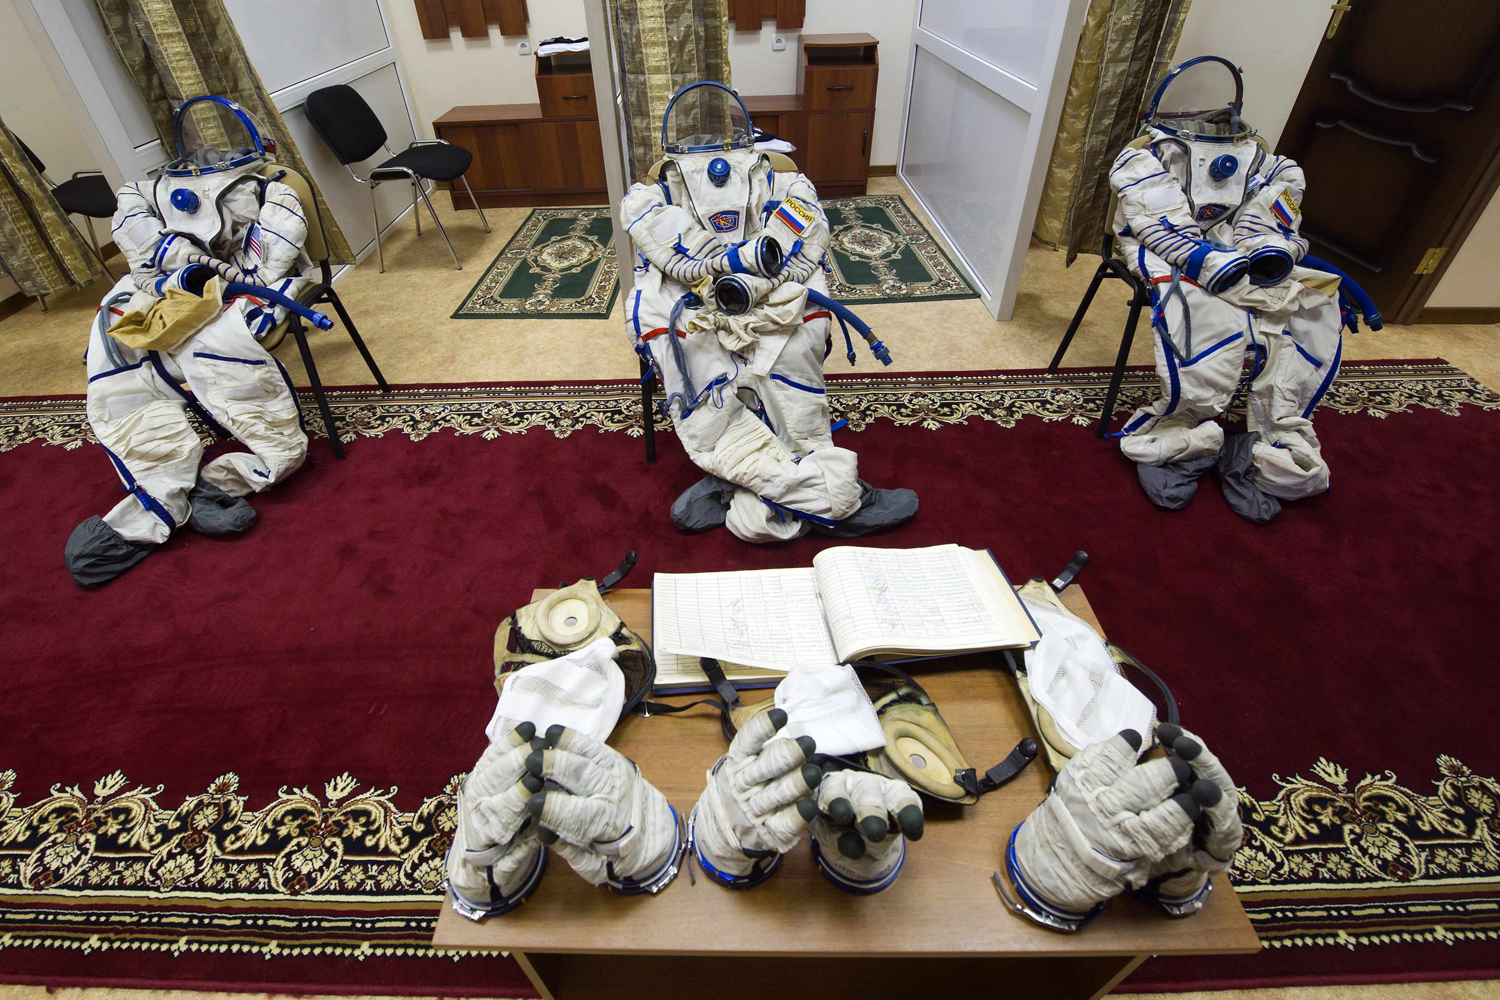 Spacesuits are left on chairs before cosmonauts' training session at the Russian cosmonaut training facility in Star City outside Moscow